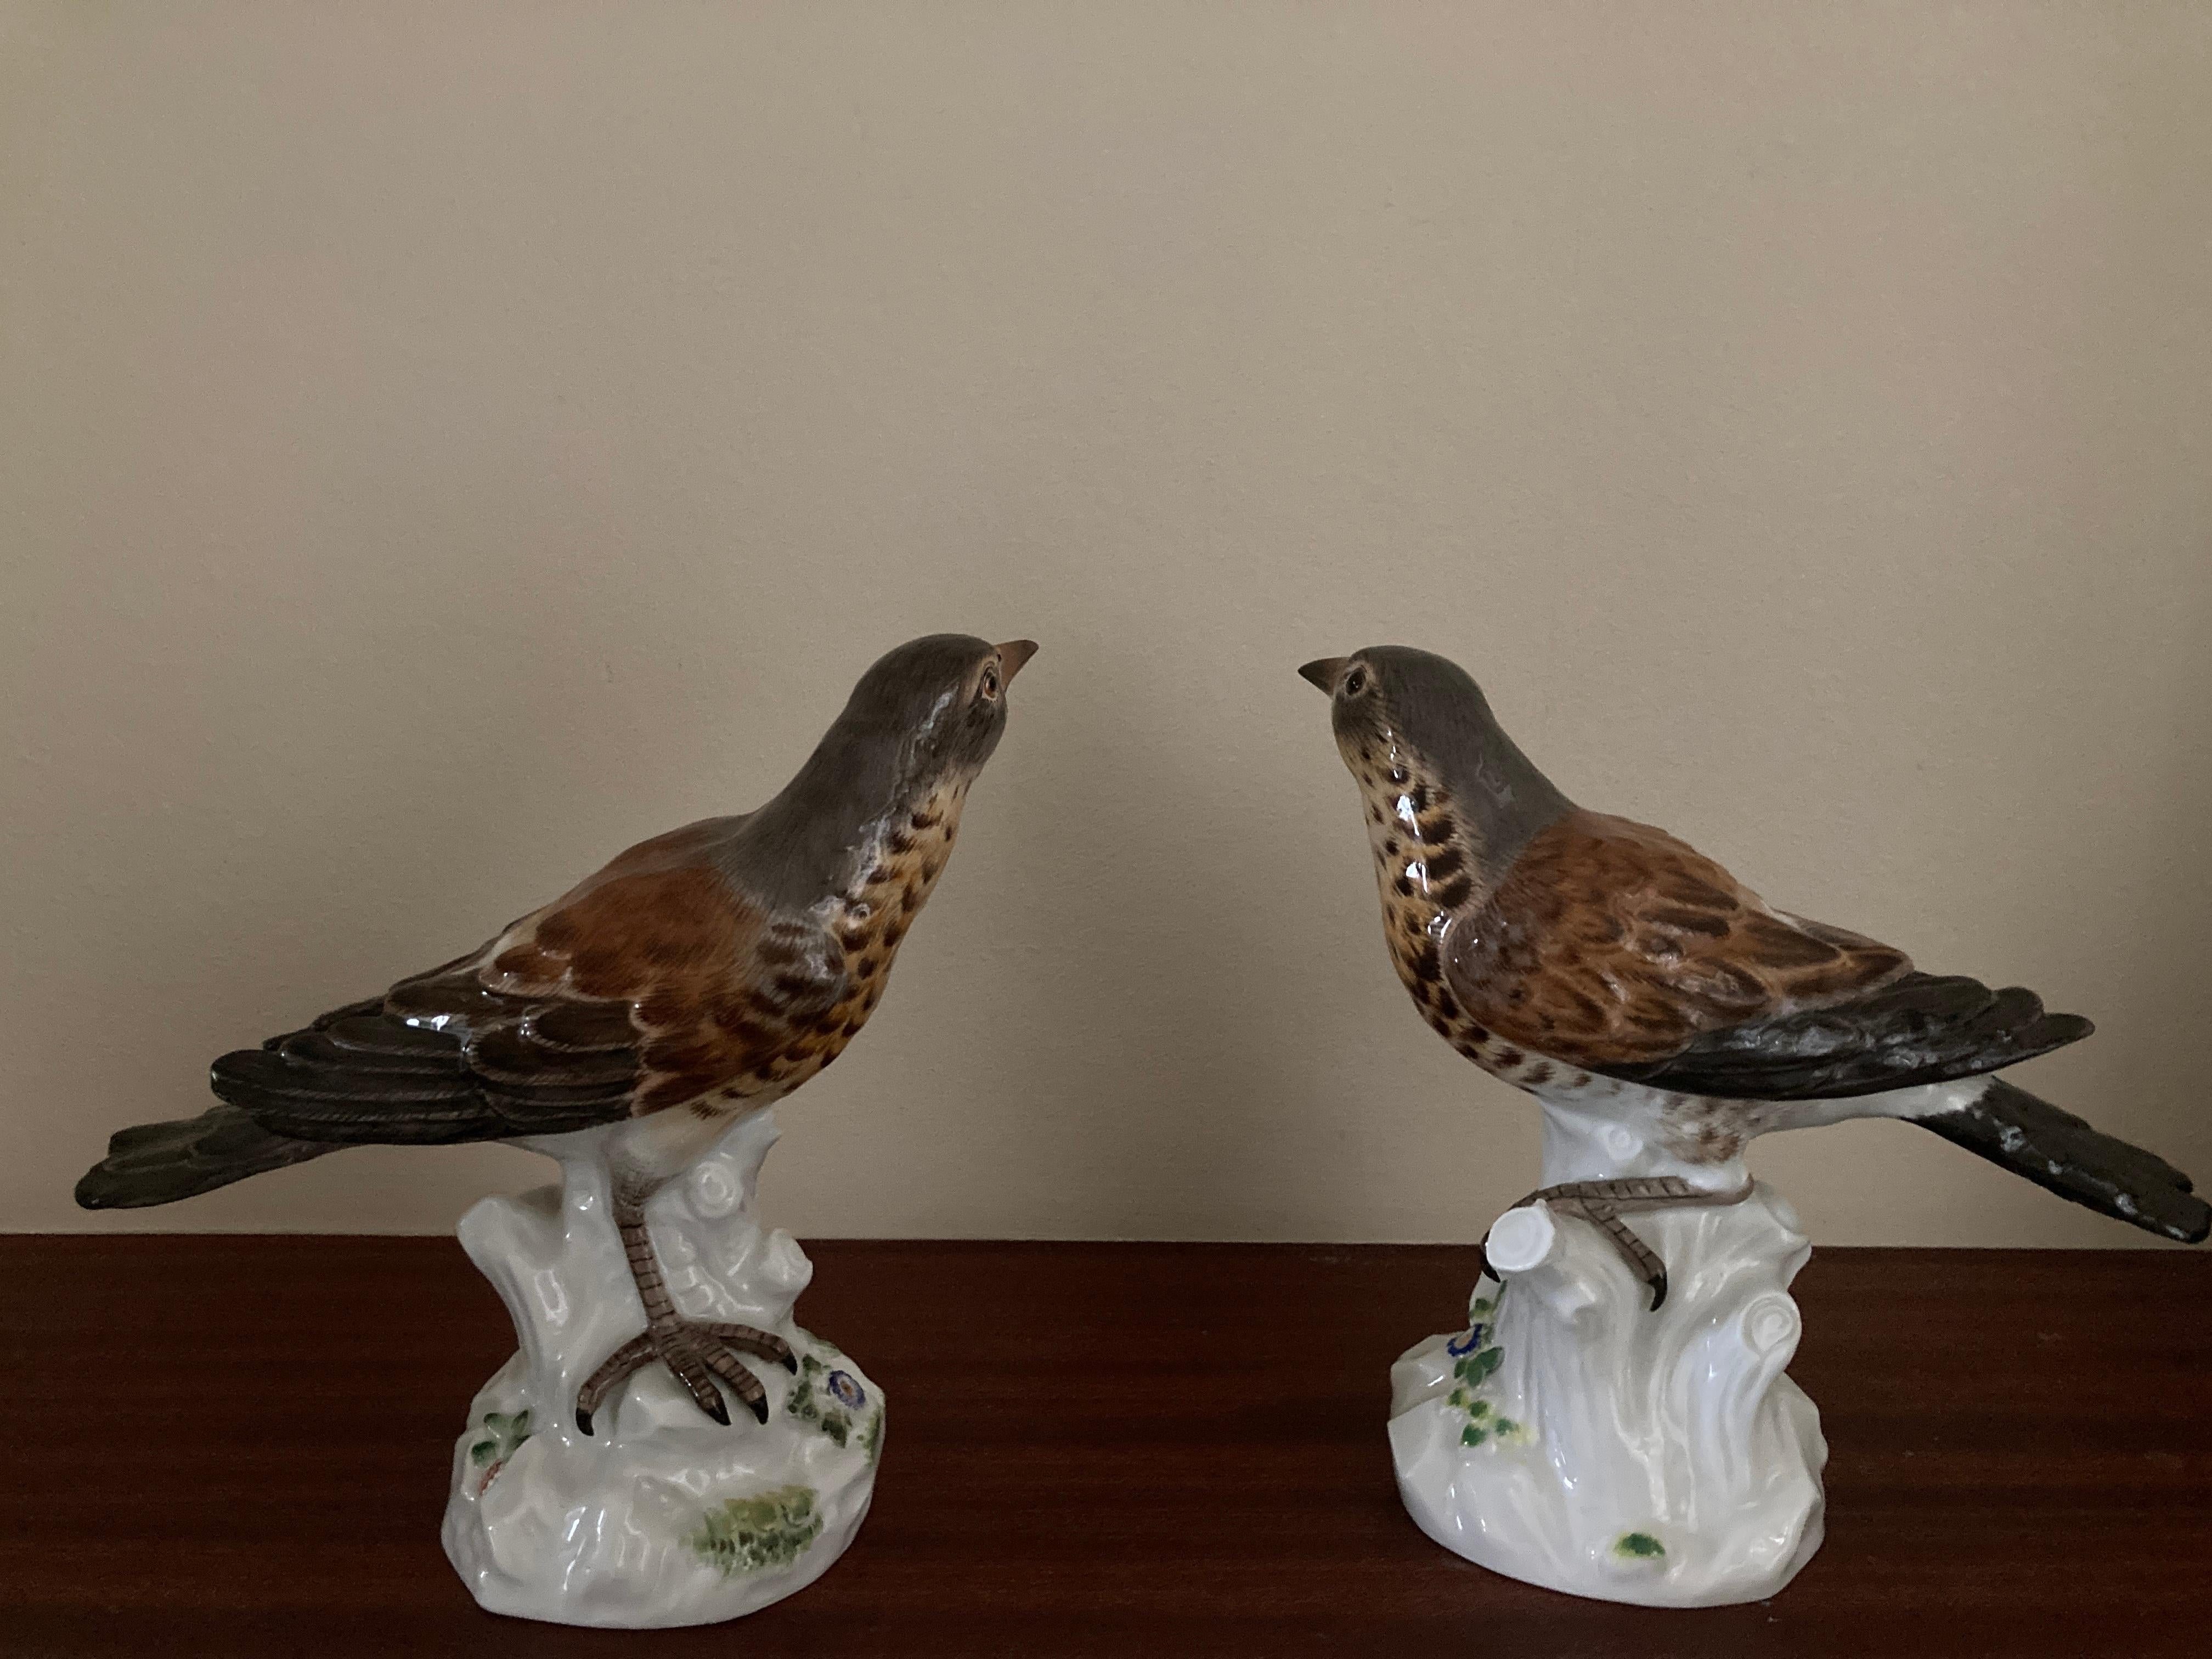 Meissen 'Pair of Thrushes' , Models 1023 & 649, 20th Century versions 

Both birds (one a Song Thrush , the other Fieldfare) perched on tree stumps bases with flower decoration. Blue sword marks and inscribed model numbers on base.

Original